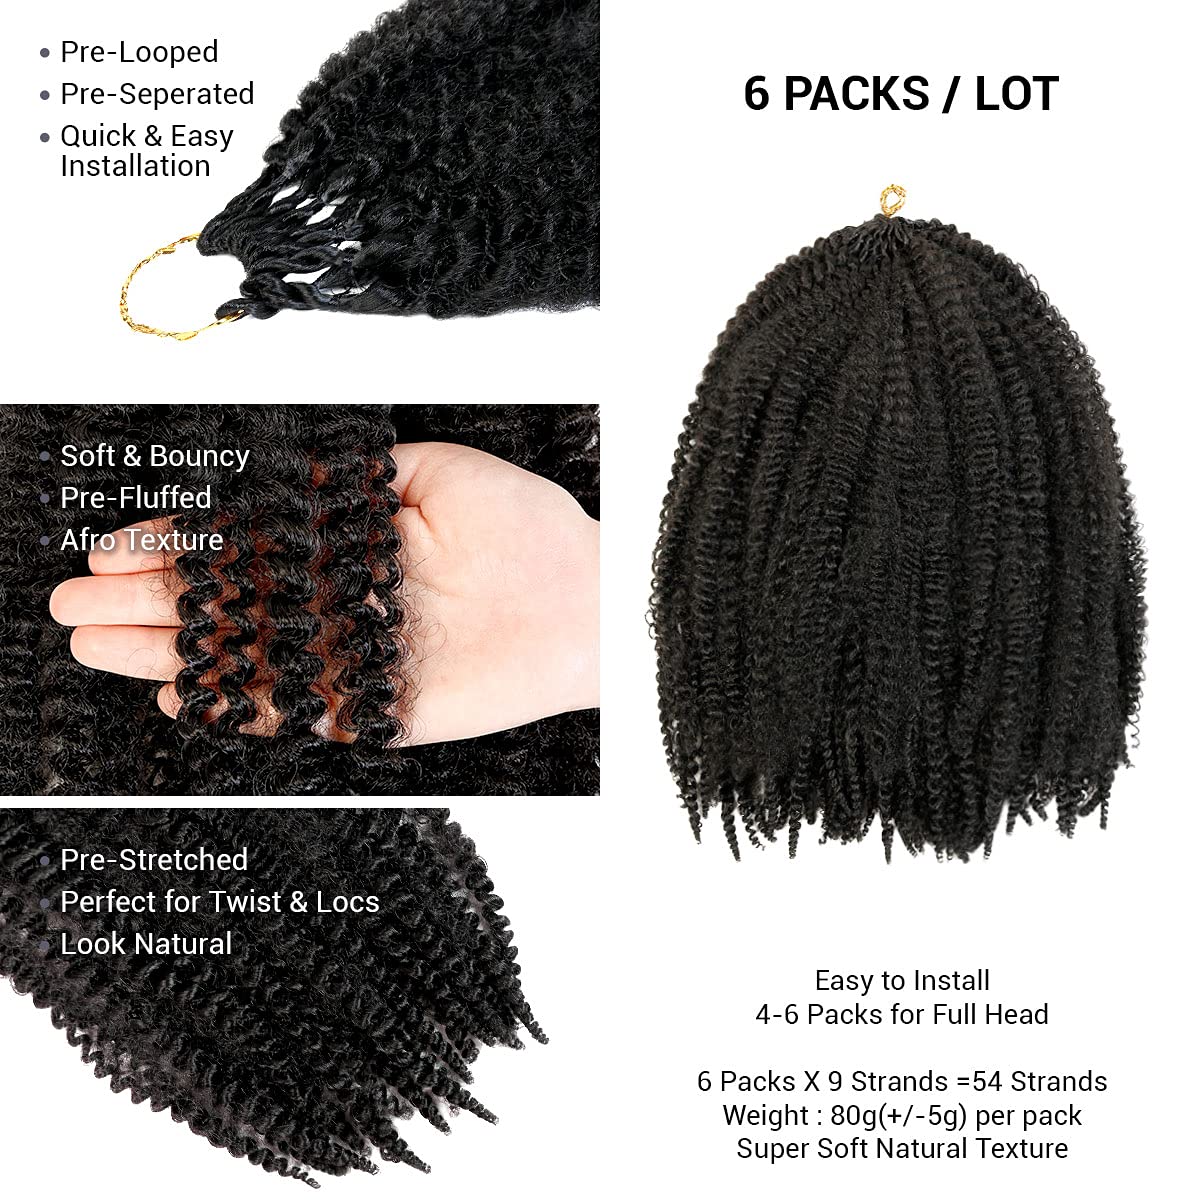 Crochet braids with the Afro twist hair!